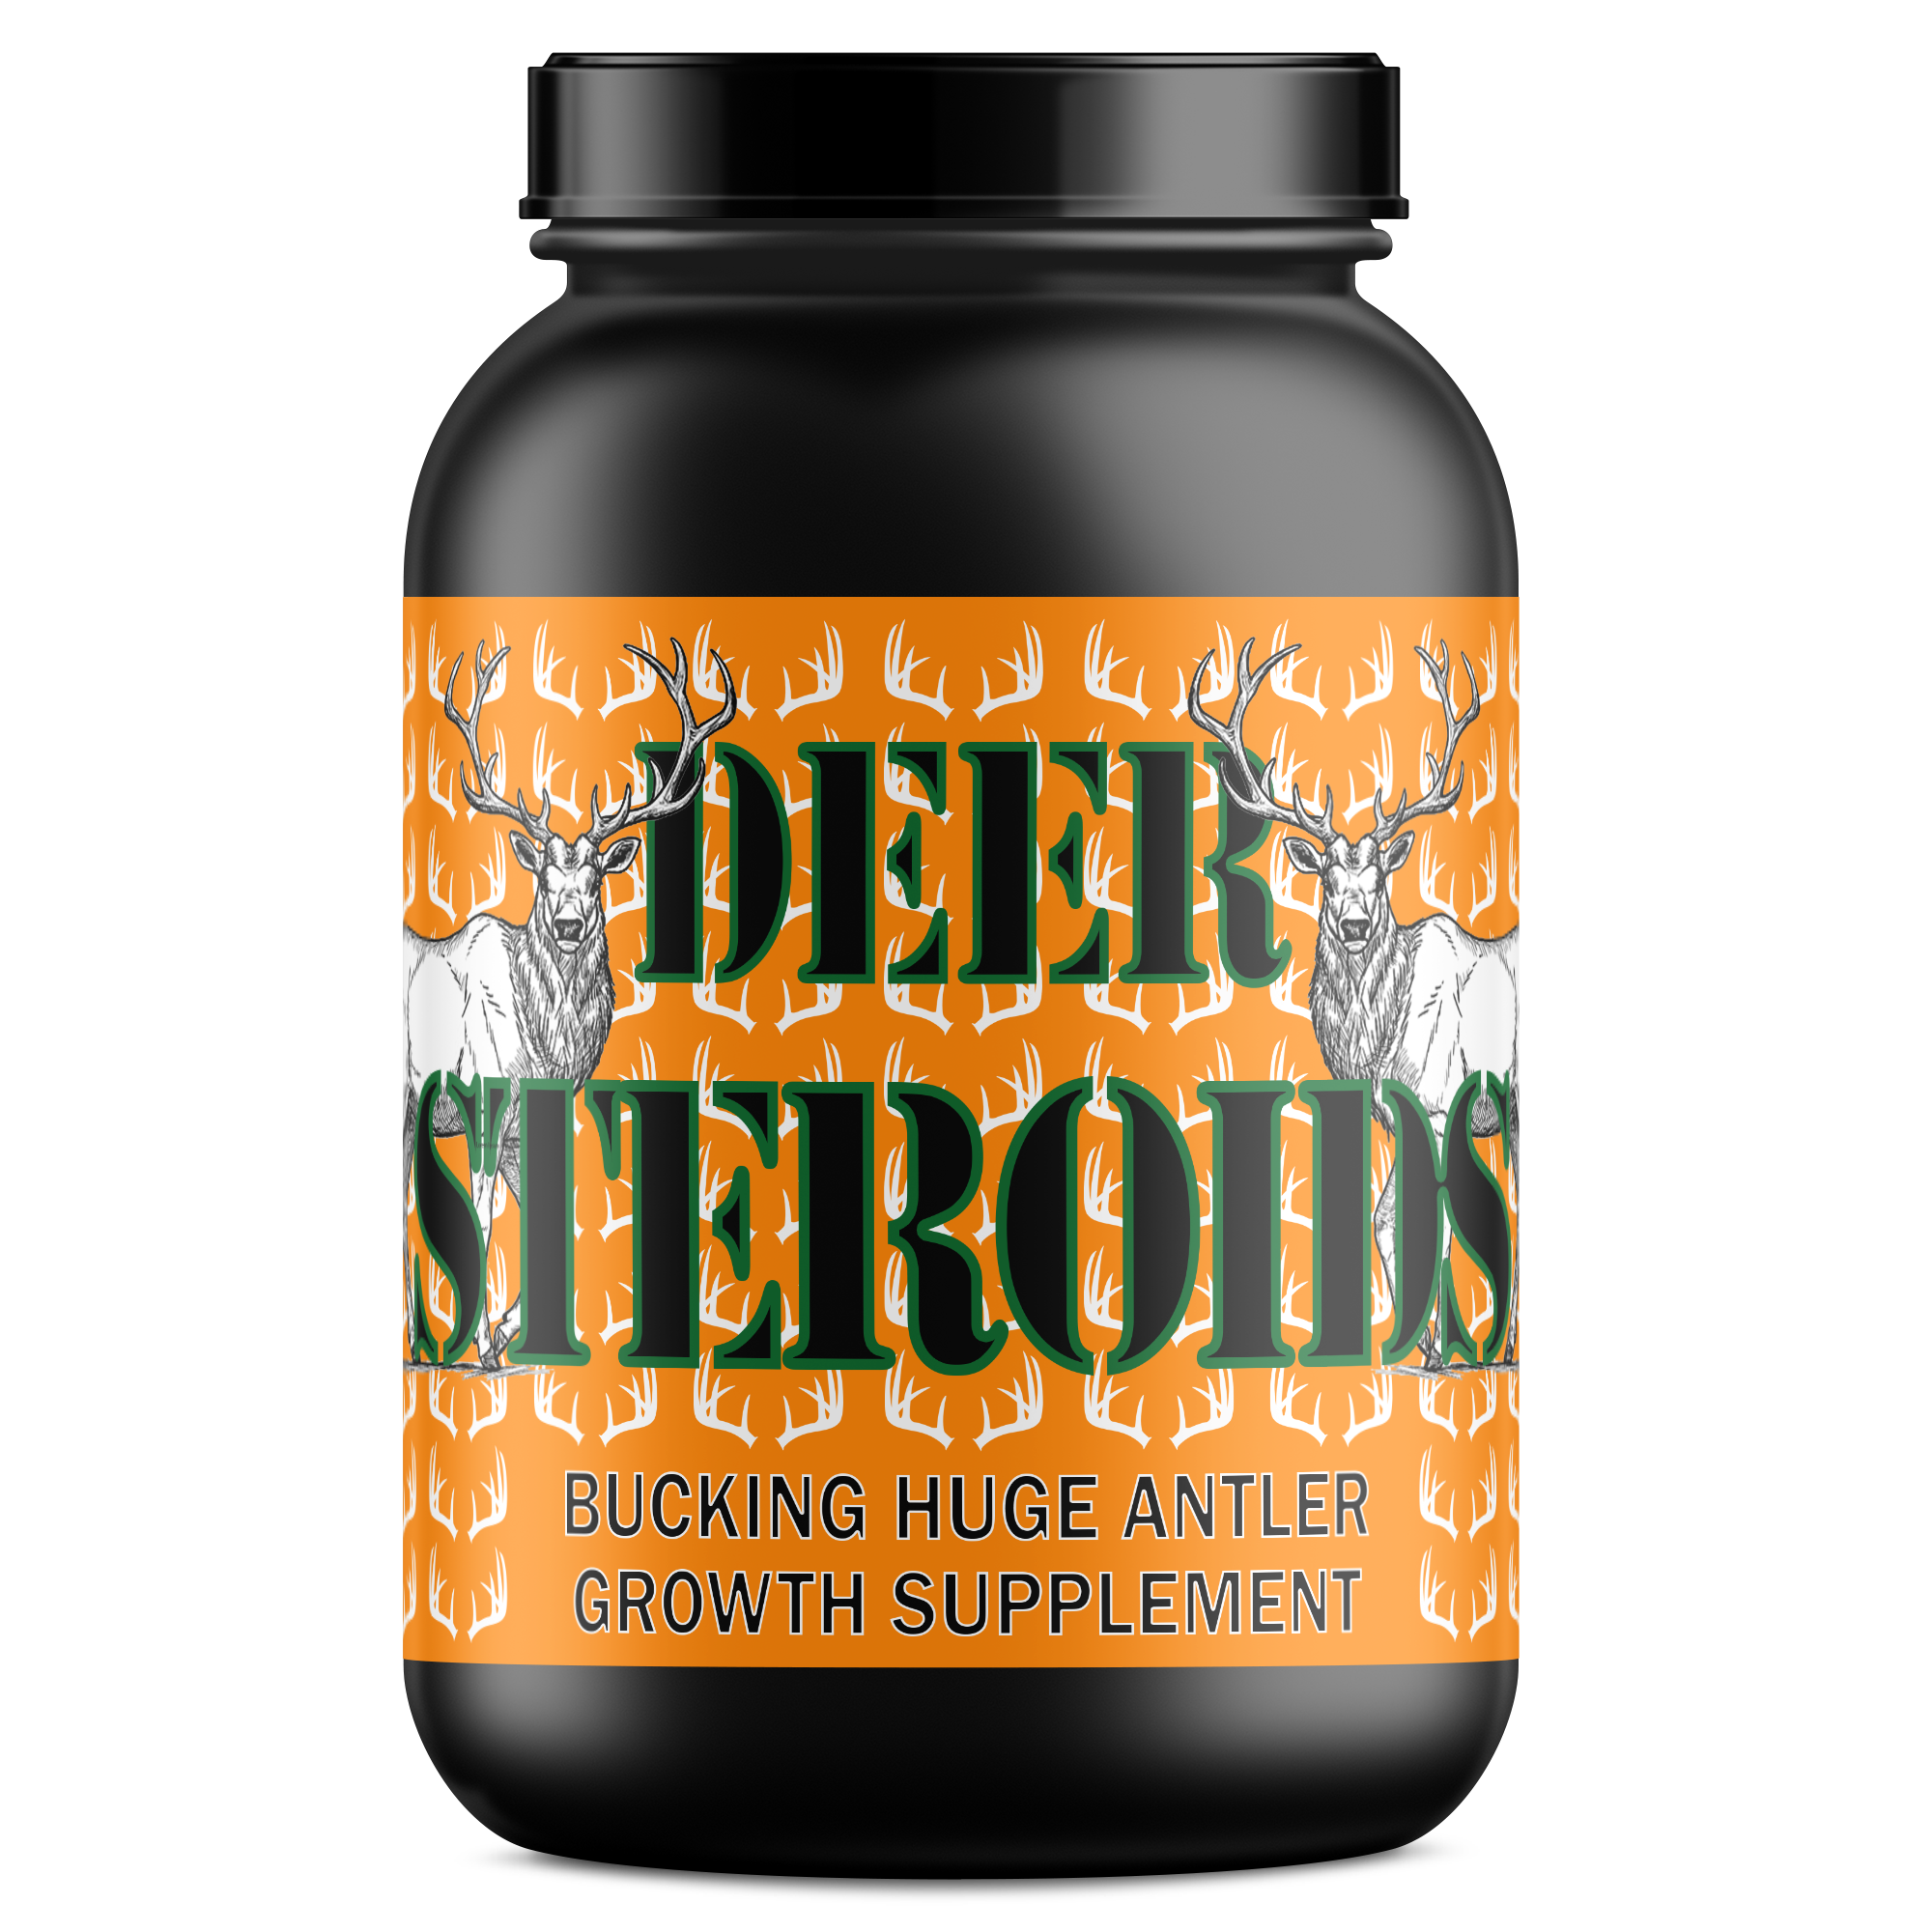 Deer Steroids is a brand new, scientifically backed supplement for deer feed that increases the size of deer antlers. This makes deer grow huge antlers.